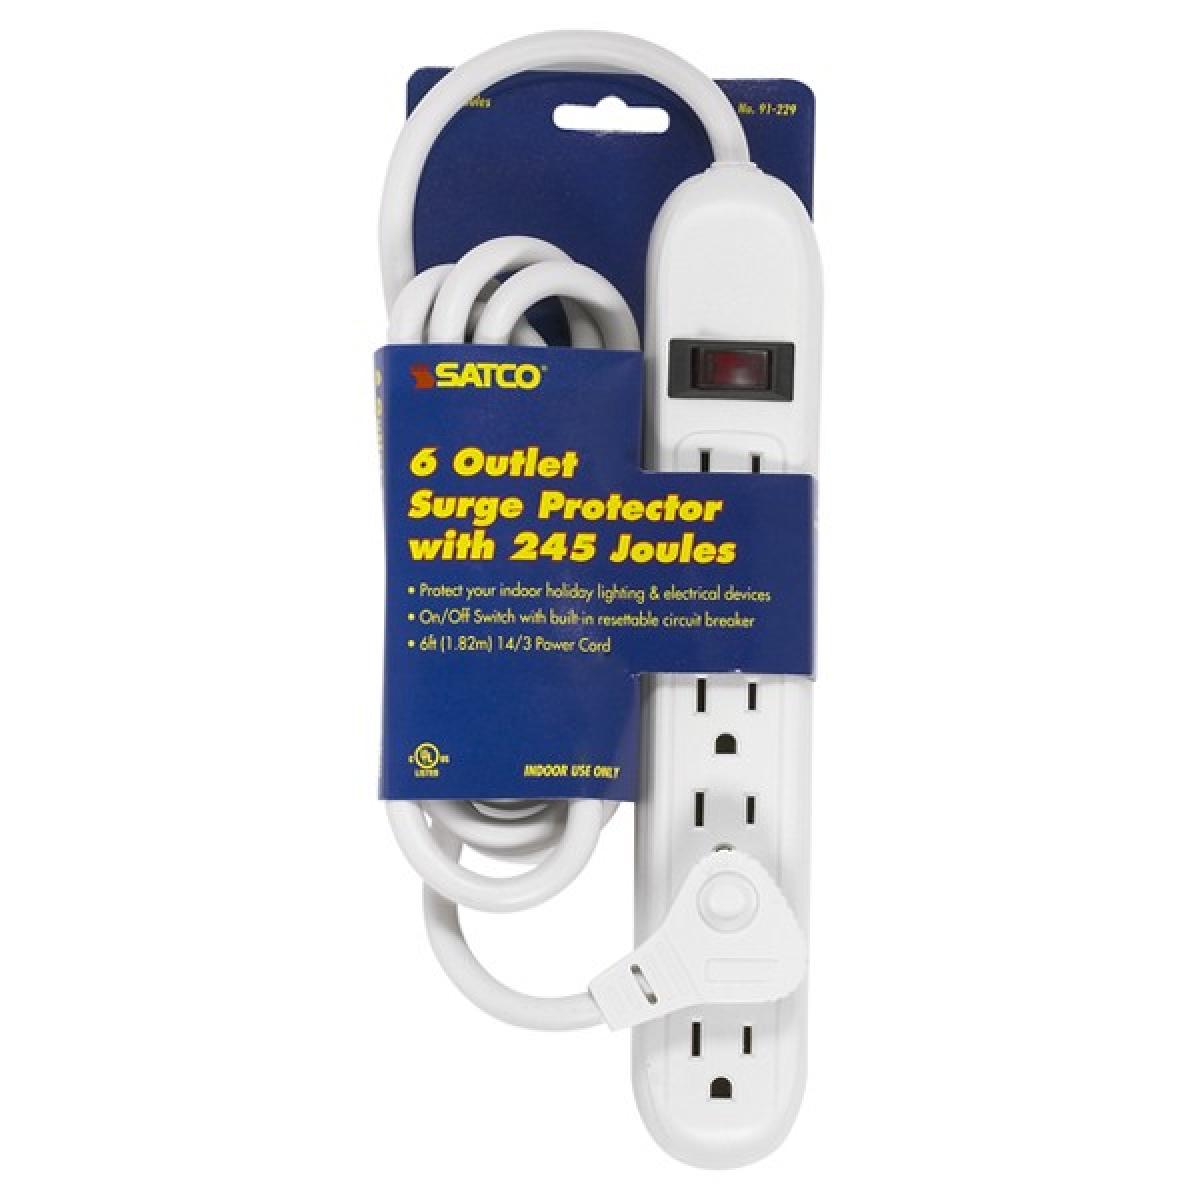 91-229 6 OUTLET SURGE PROTECTOR WITH